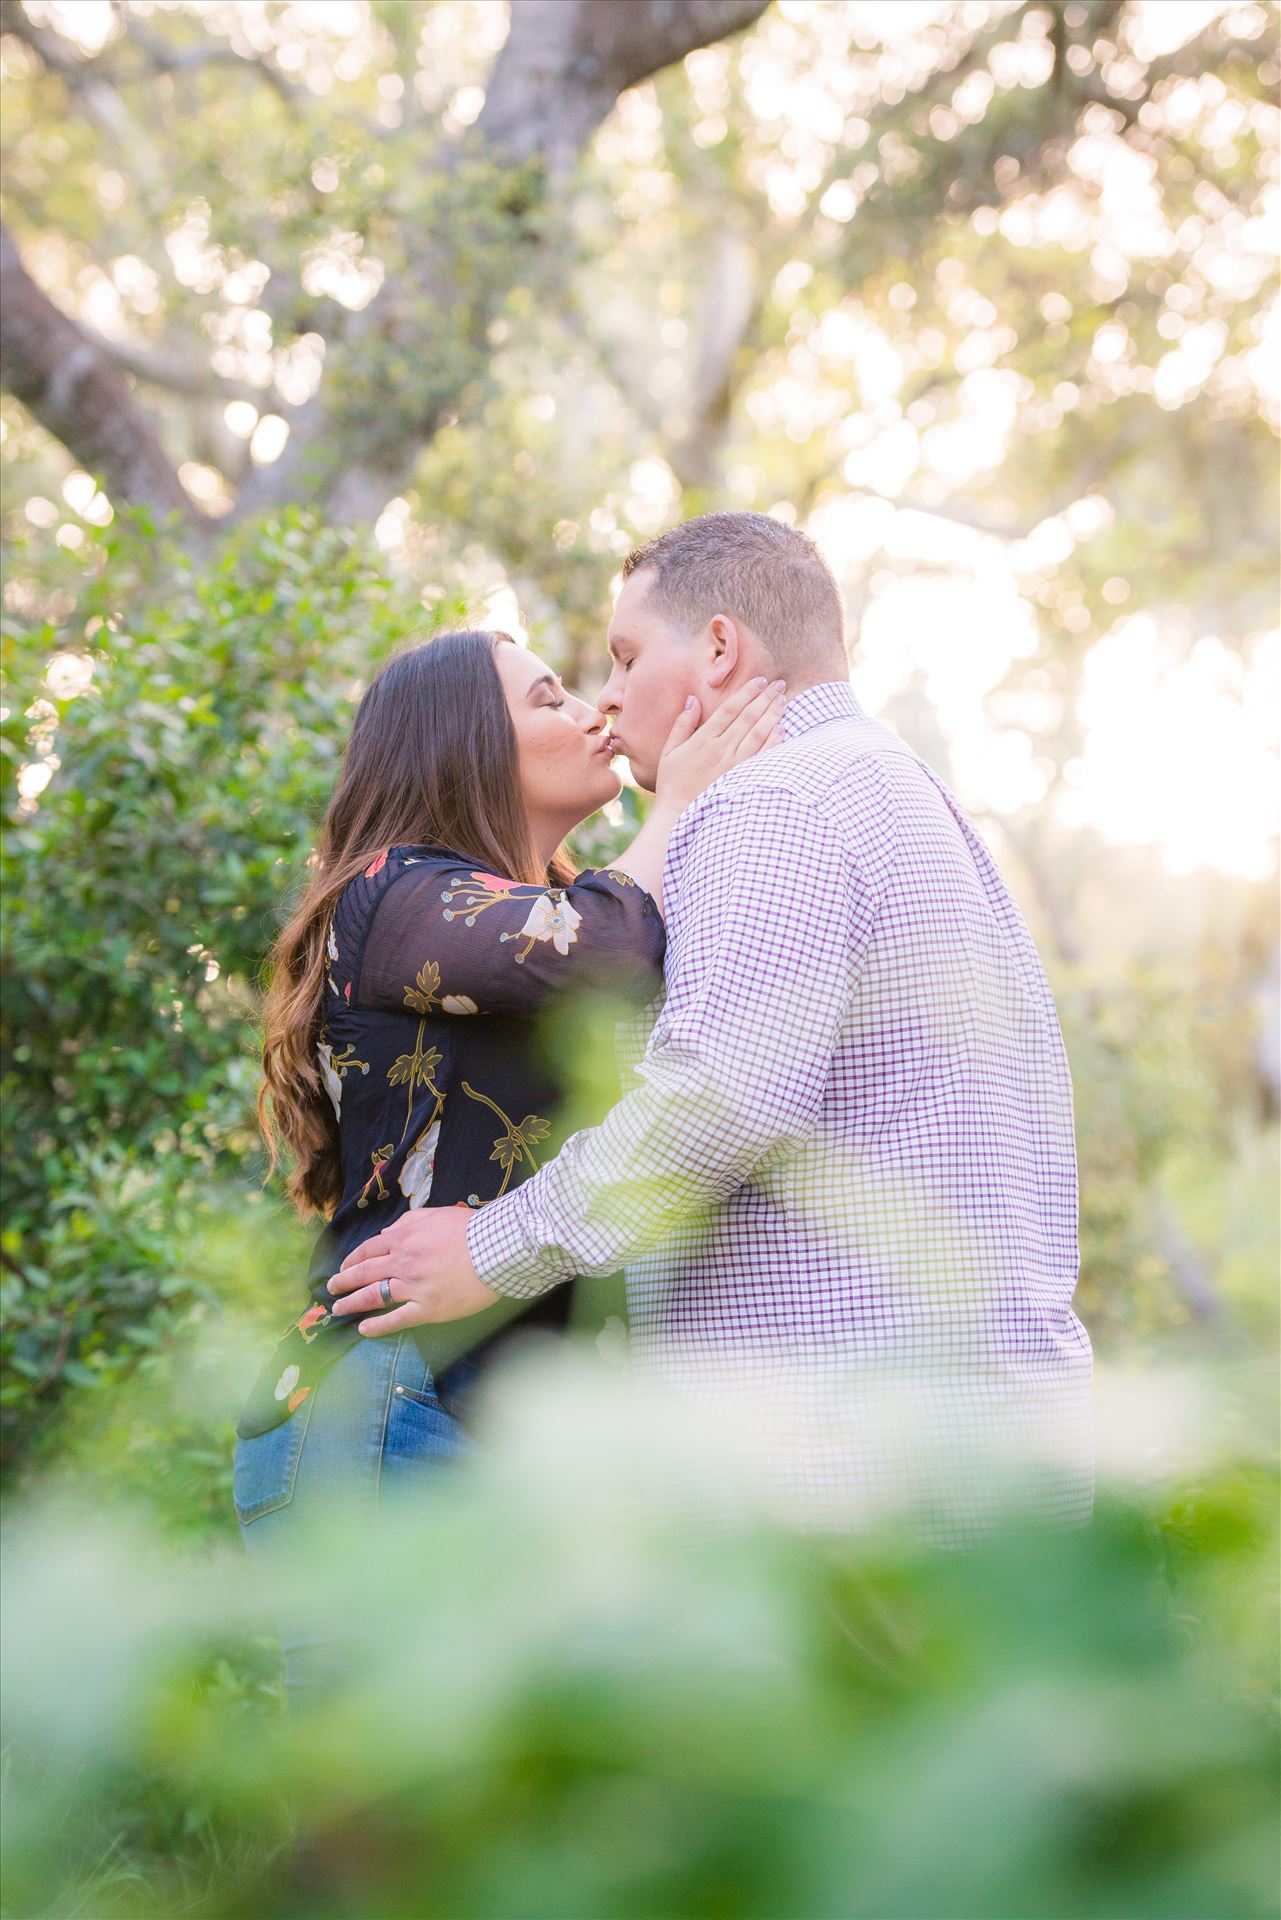 DSC_3616.JPG - Los Osos Oaks Nature Reserve Engagement Photography Session by Mirror's Edge Photography with gorgeous light by Sarah Williams